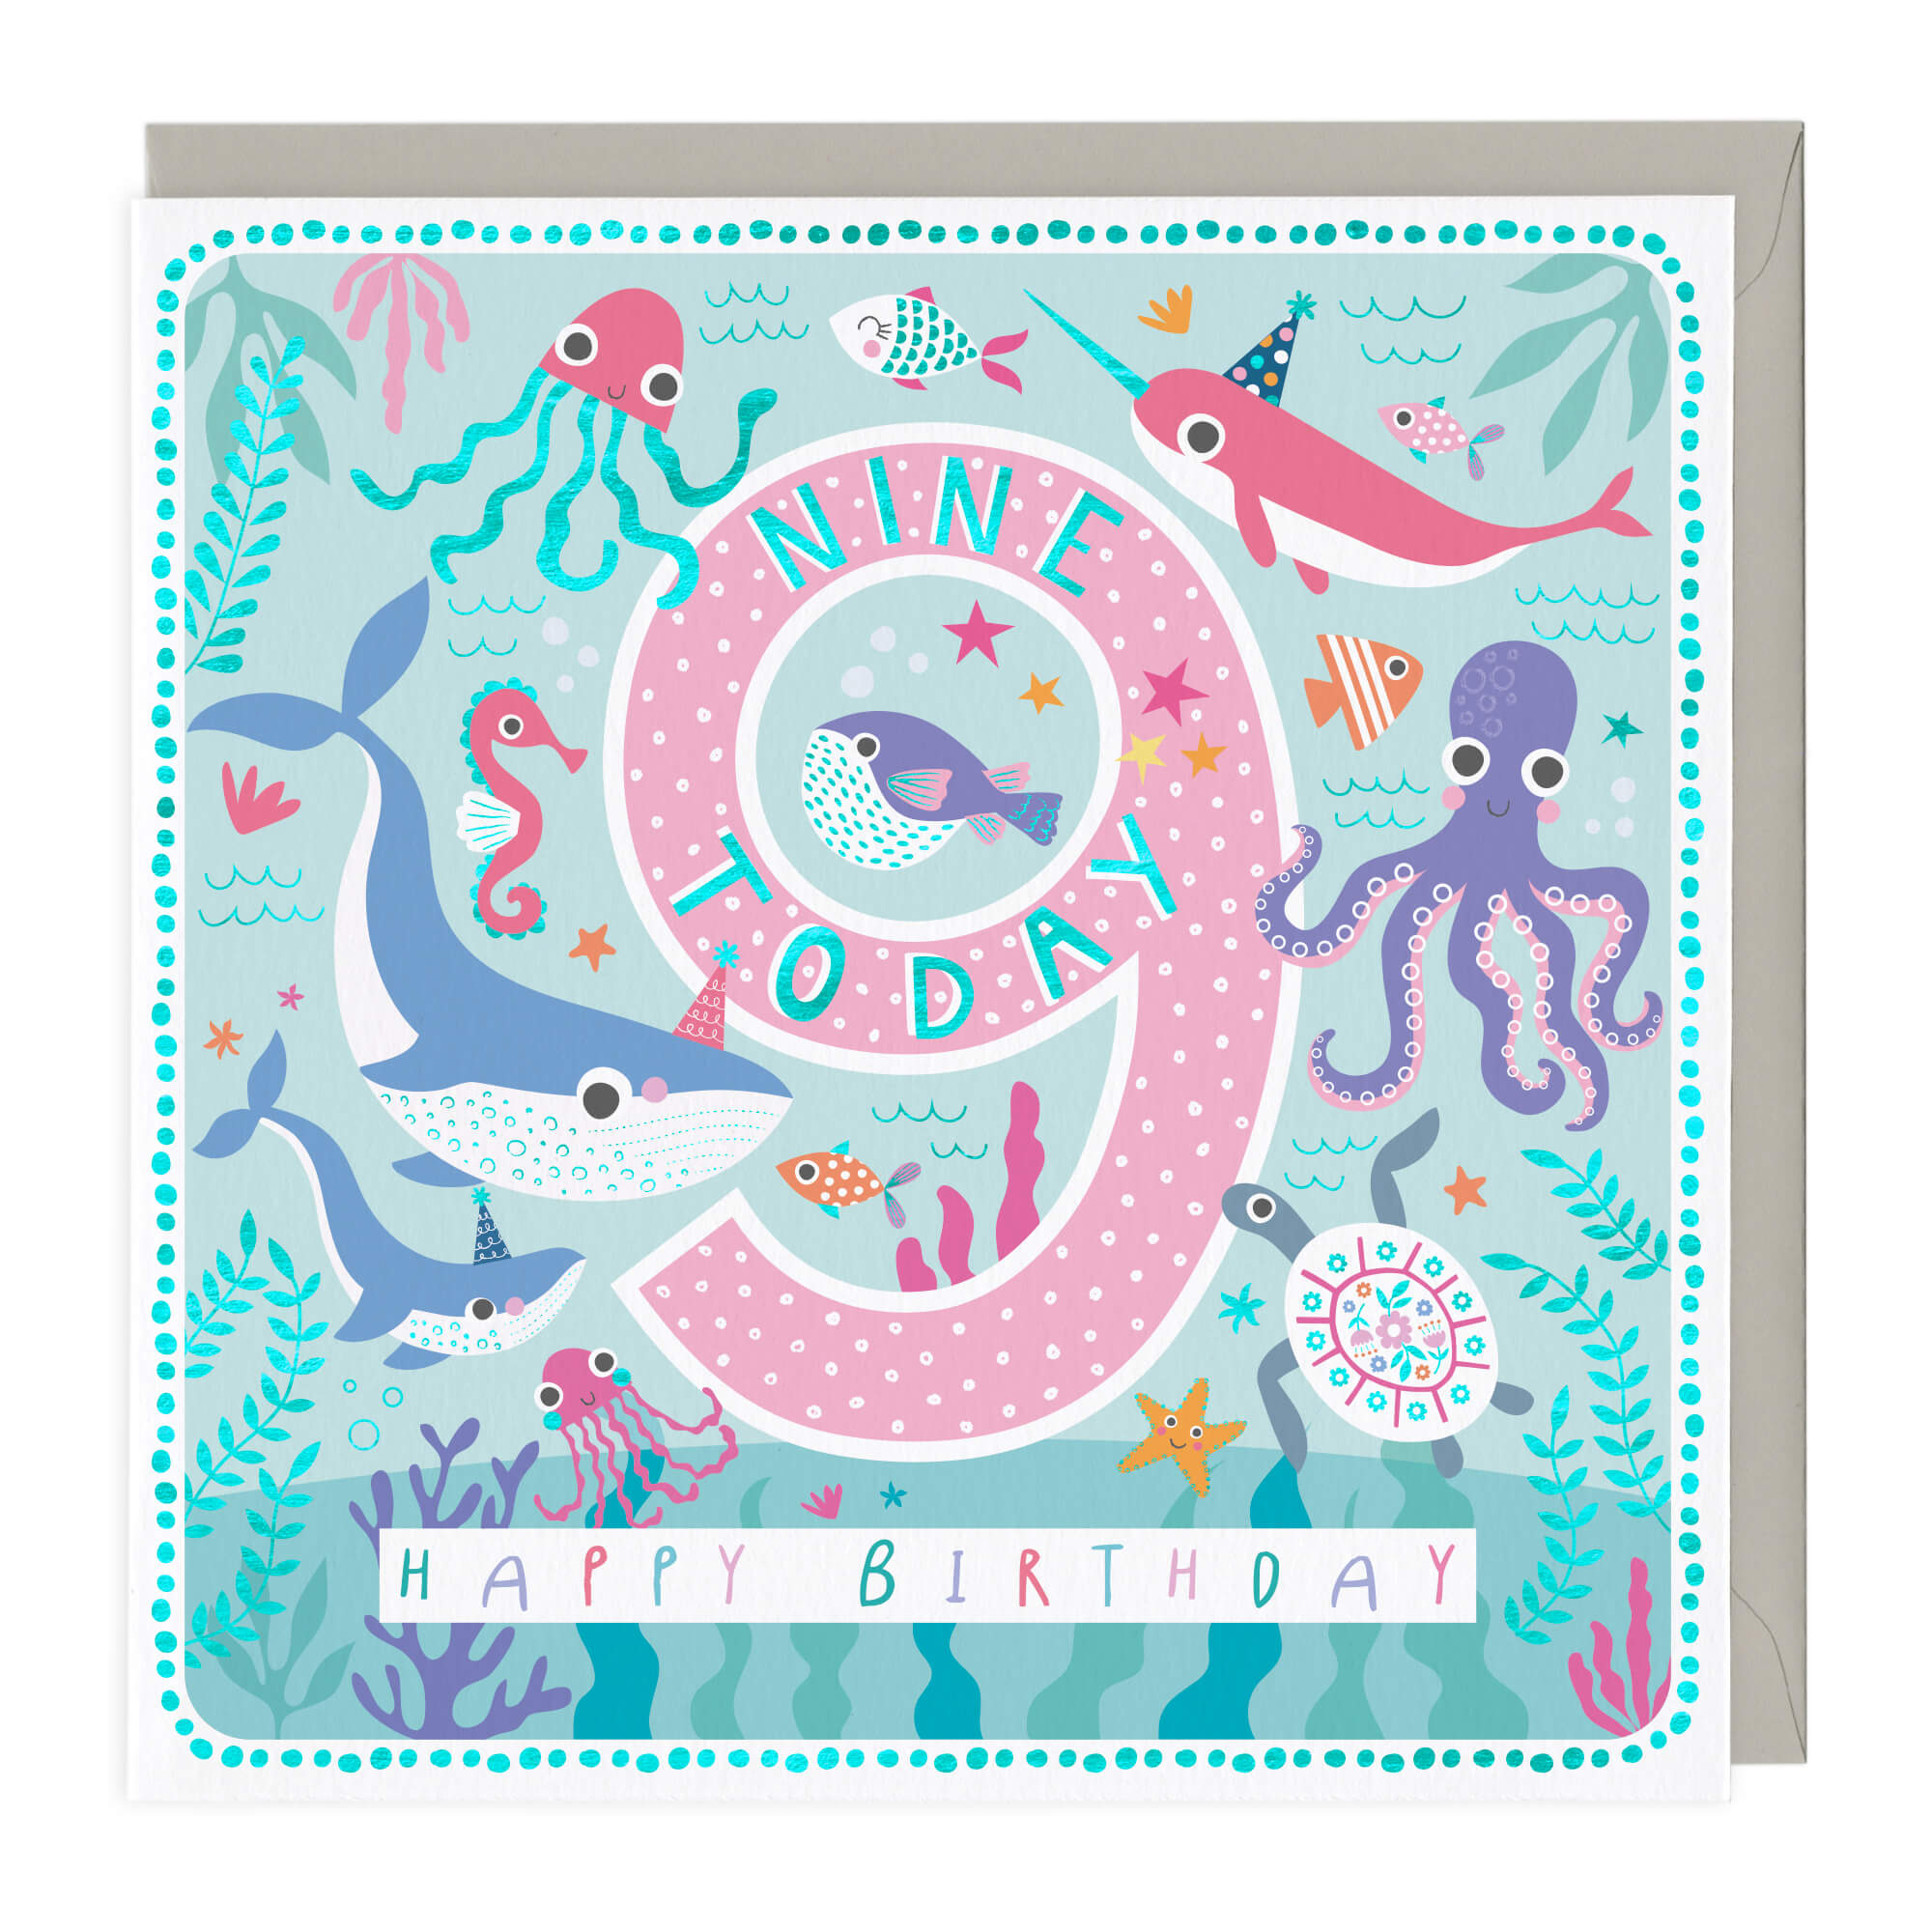 An image of 9 Today Sea Life Children's Birthday Card Whistlefish